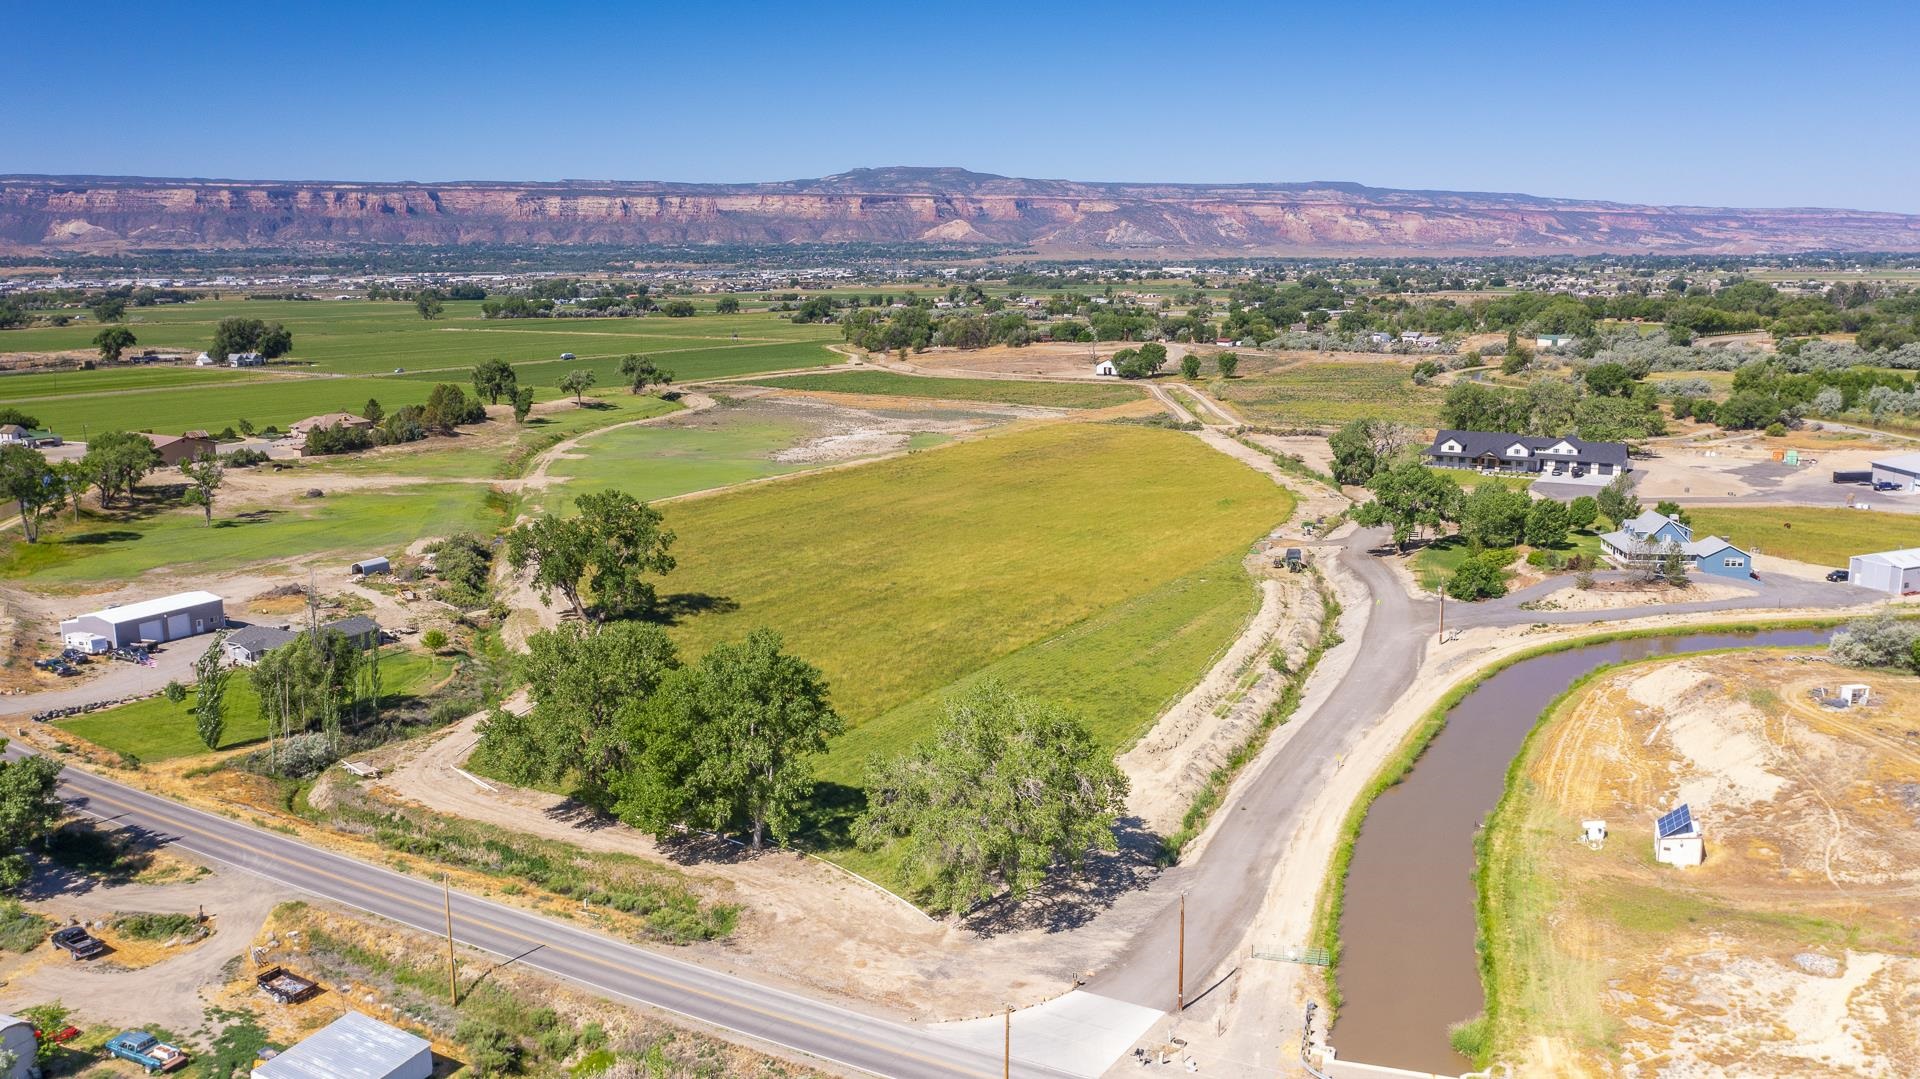 Opportunity awaits! This 6.23 acres is located in one of the most desirable locations in Grand Junction and boasts opportunity and options for growth on beautiful level ground currently in pasture! This parcel includes 5 shares of GVIC irrigated acres and is perfectly located just minutes from the city park, restaurants, healthcare facilities and more while still providing you with the peace and quiet comforts of country living. Bring your vision and make your dream a reality!